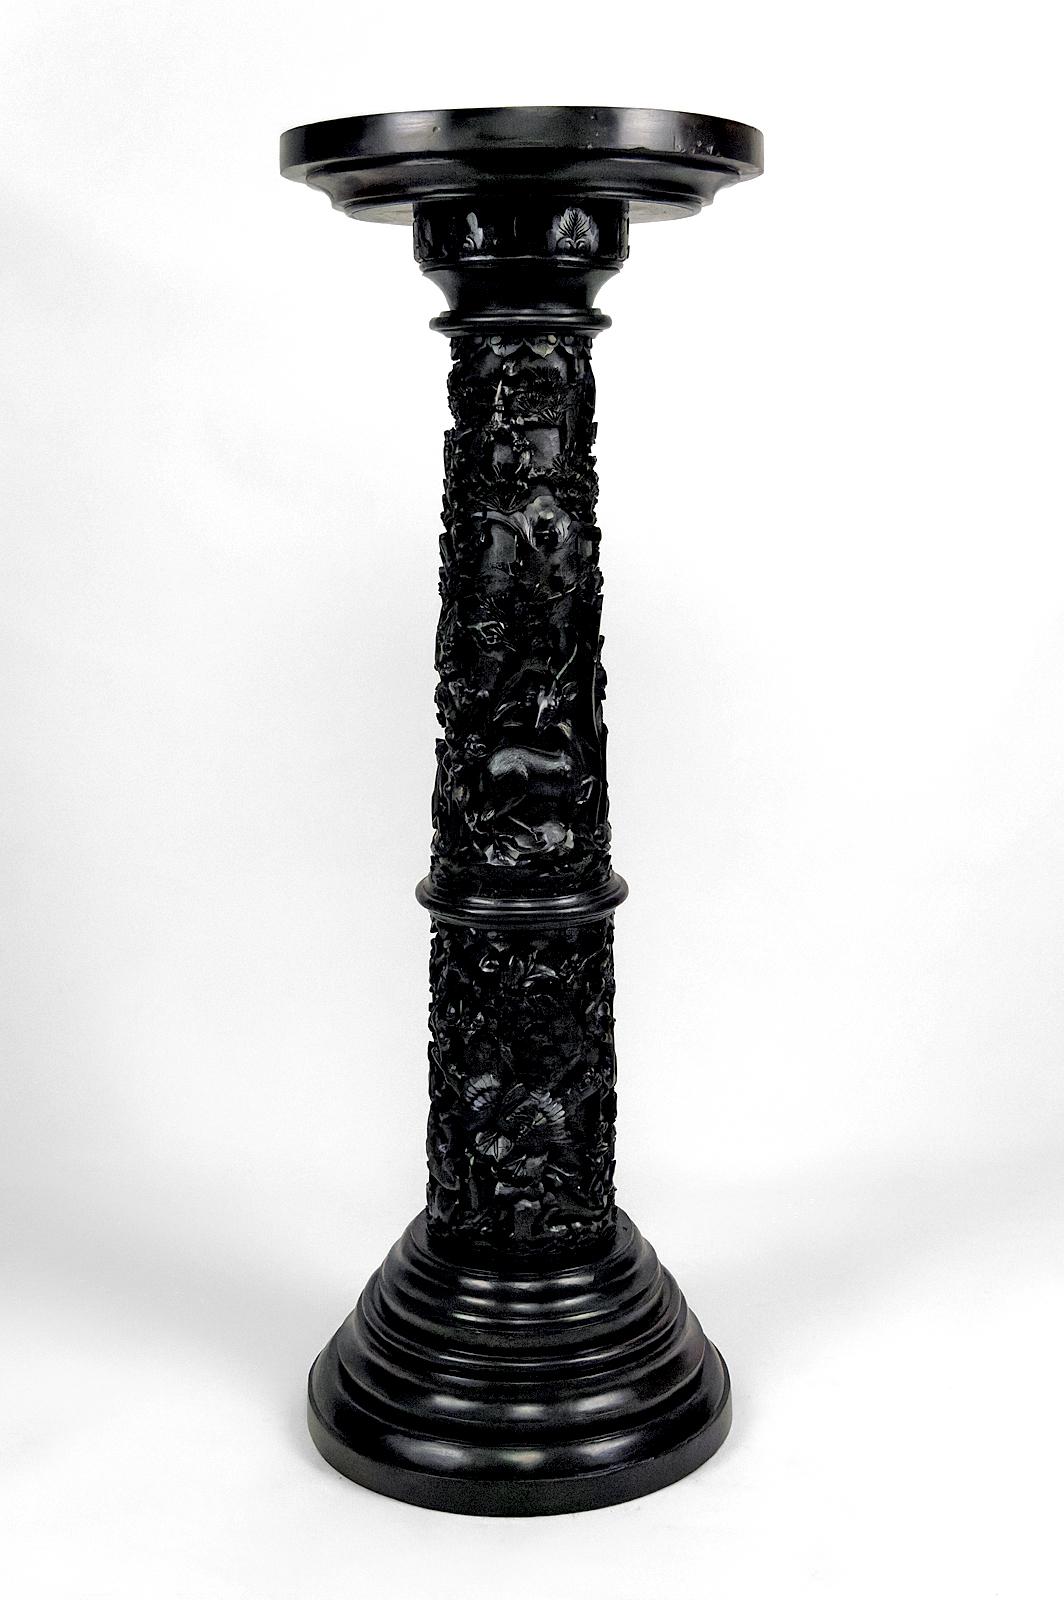 Asian work, Indochina or South China, circa 1880


Central shaft carved with animals and floral scenes: deer, doe, bats, butterflies, rats, peacocks, flowers, birds, plants...

In excellent condition

Column that can be dismantled into 4